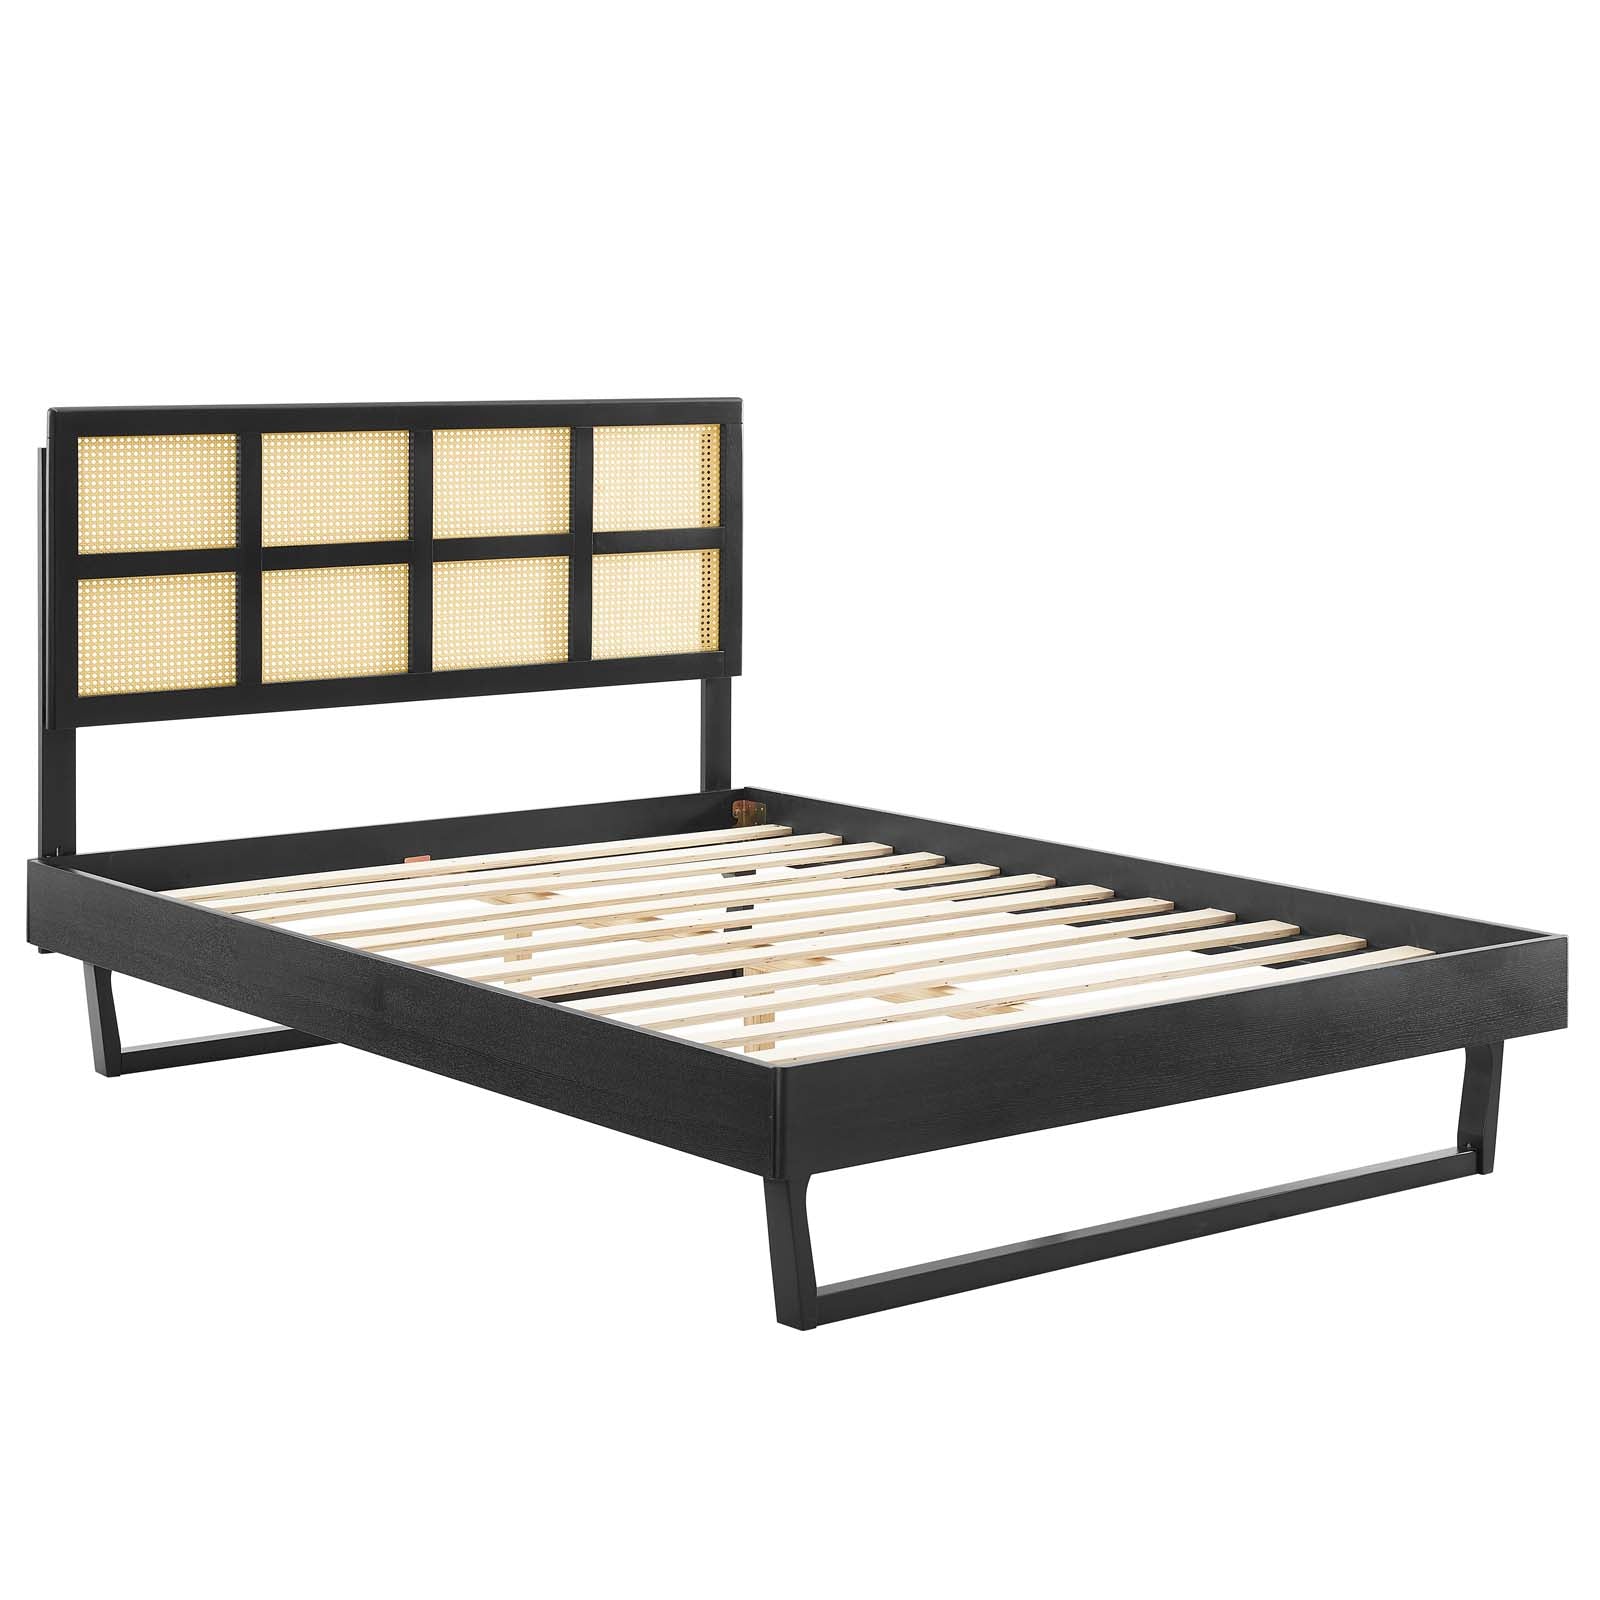 Sidney Cane and Wood Queen Platform Bed With Angular Legs